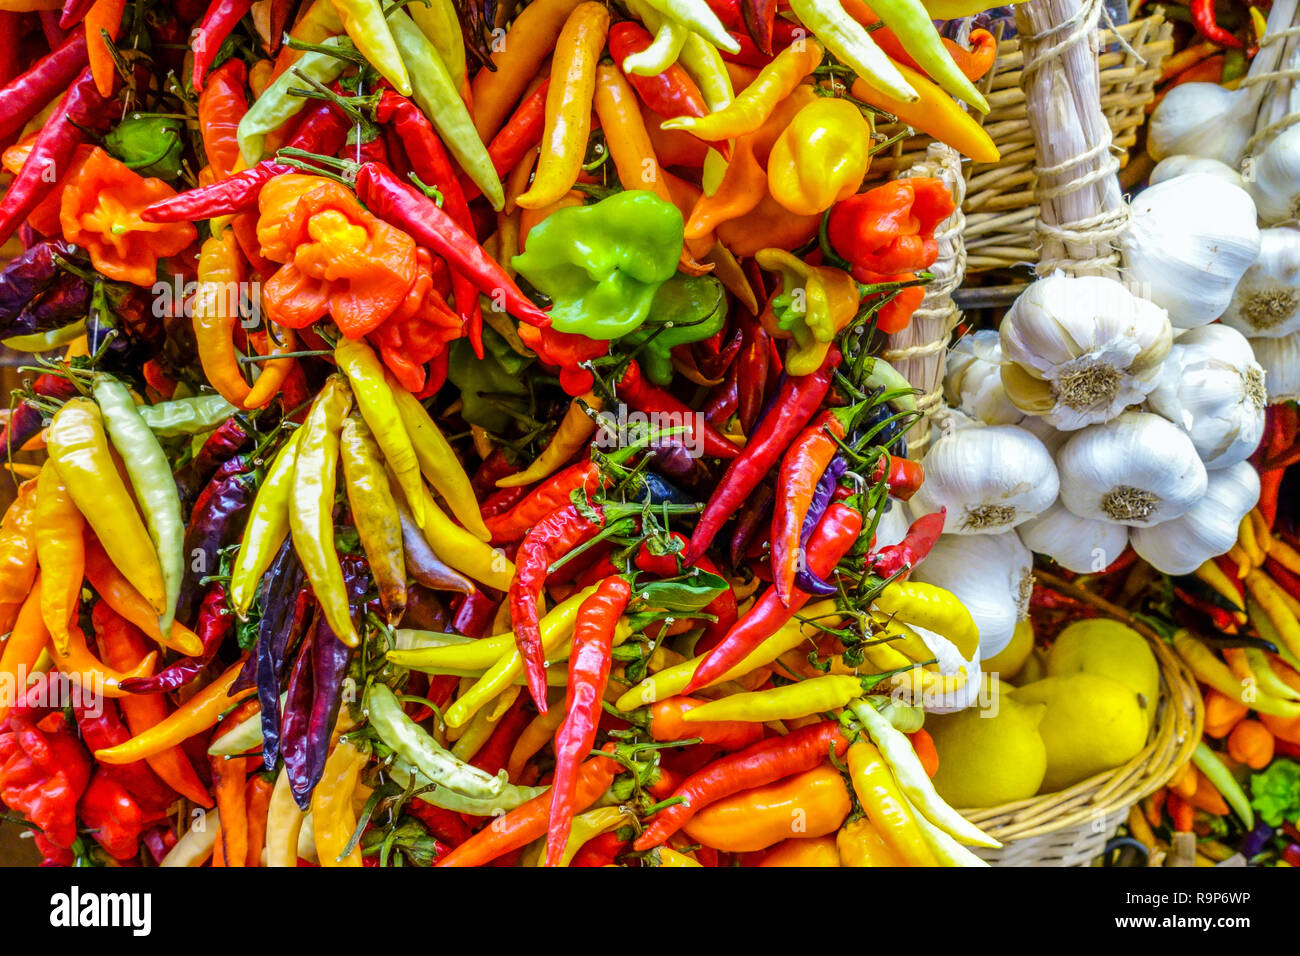 Various hot chilli peppers bunch Spain market Chillies Stock Photo